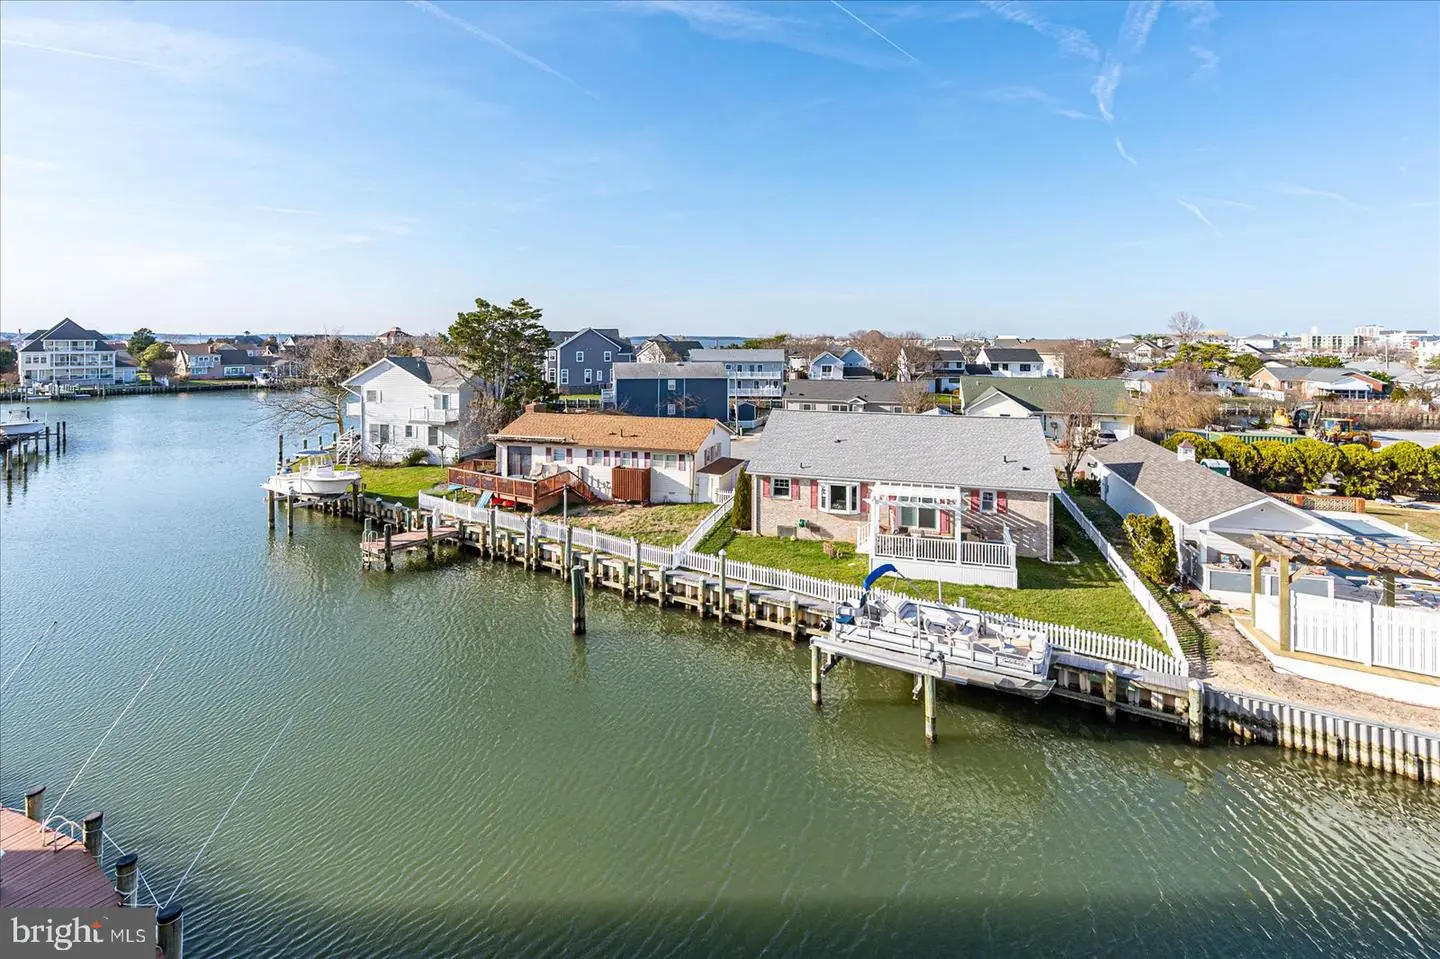 MDWO2019672-802922310960-2024-03-15-14-18-07 300 17th St #303 | Ocean City, MD Real Estate For Sale | MLS# Mdwo2019672  - 1st Choice Properties